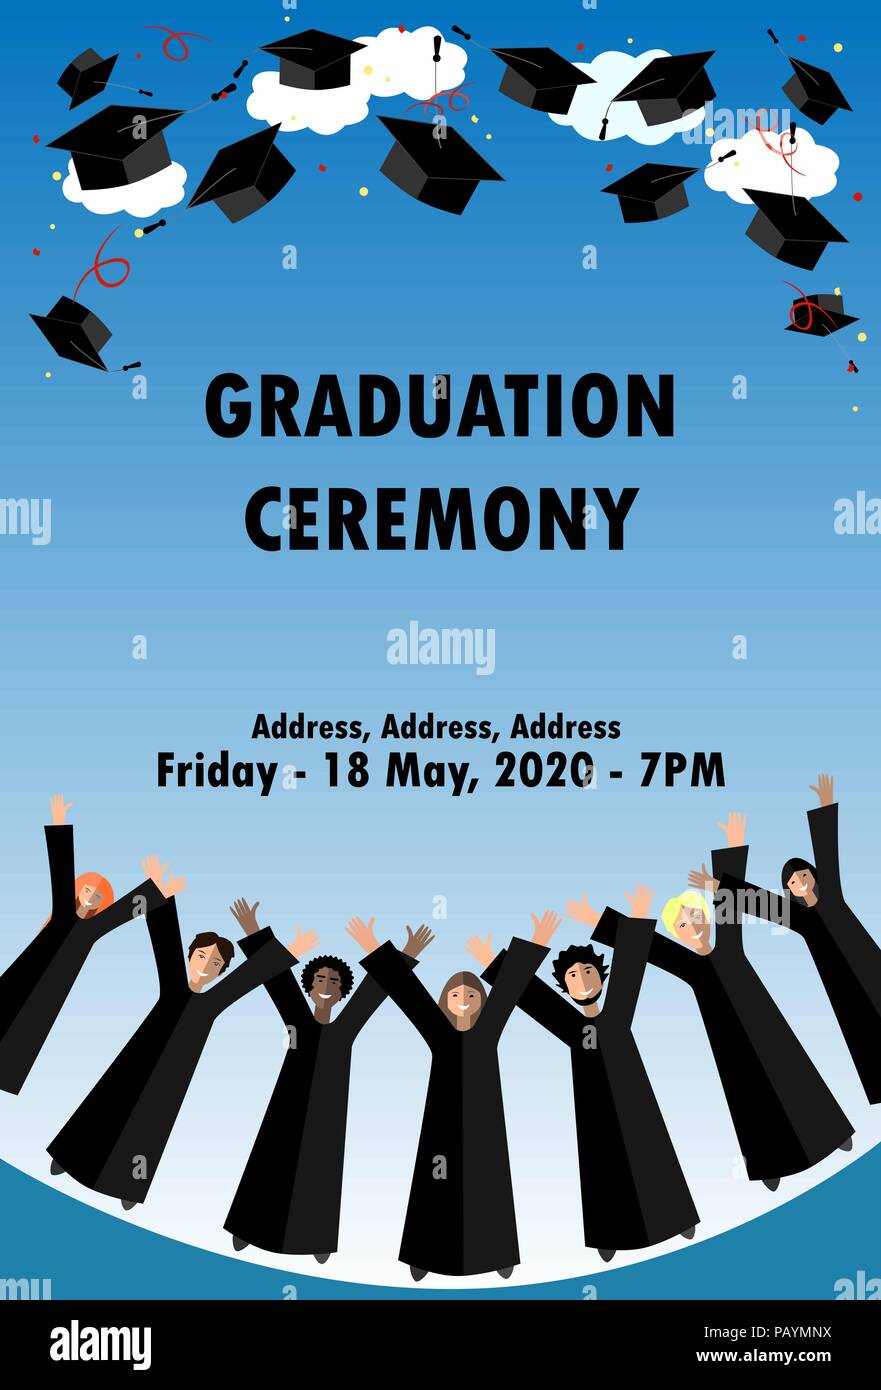 Vector banner ror draduation ceremony. Students celebrate their graduation by throwing their graduation hats in the air. Eduaction card or frame Stock Vector